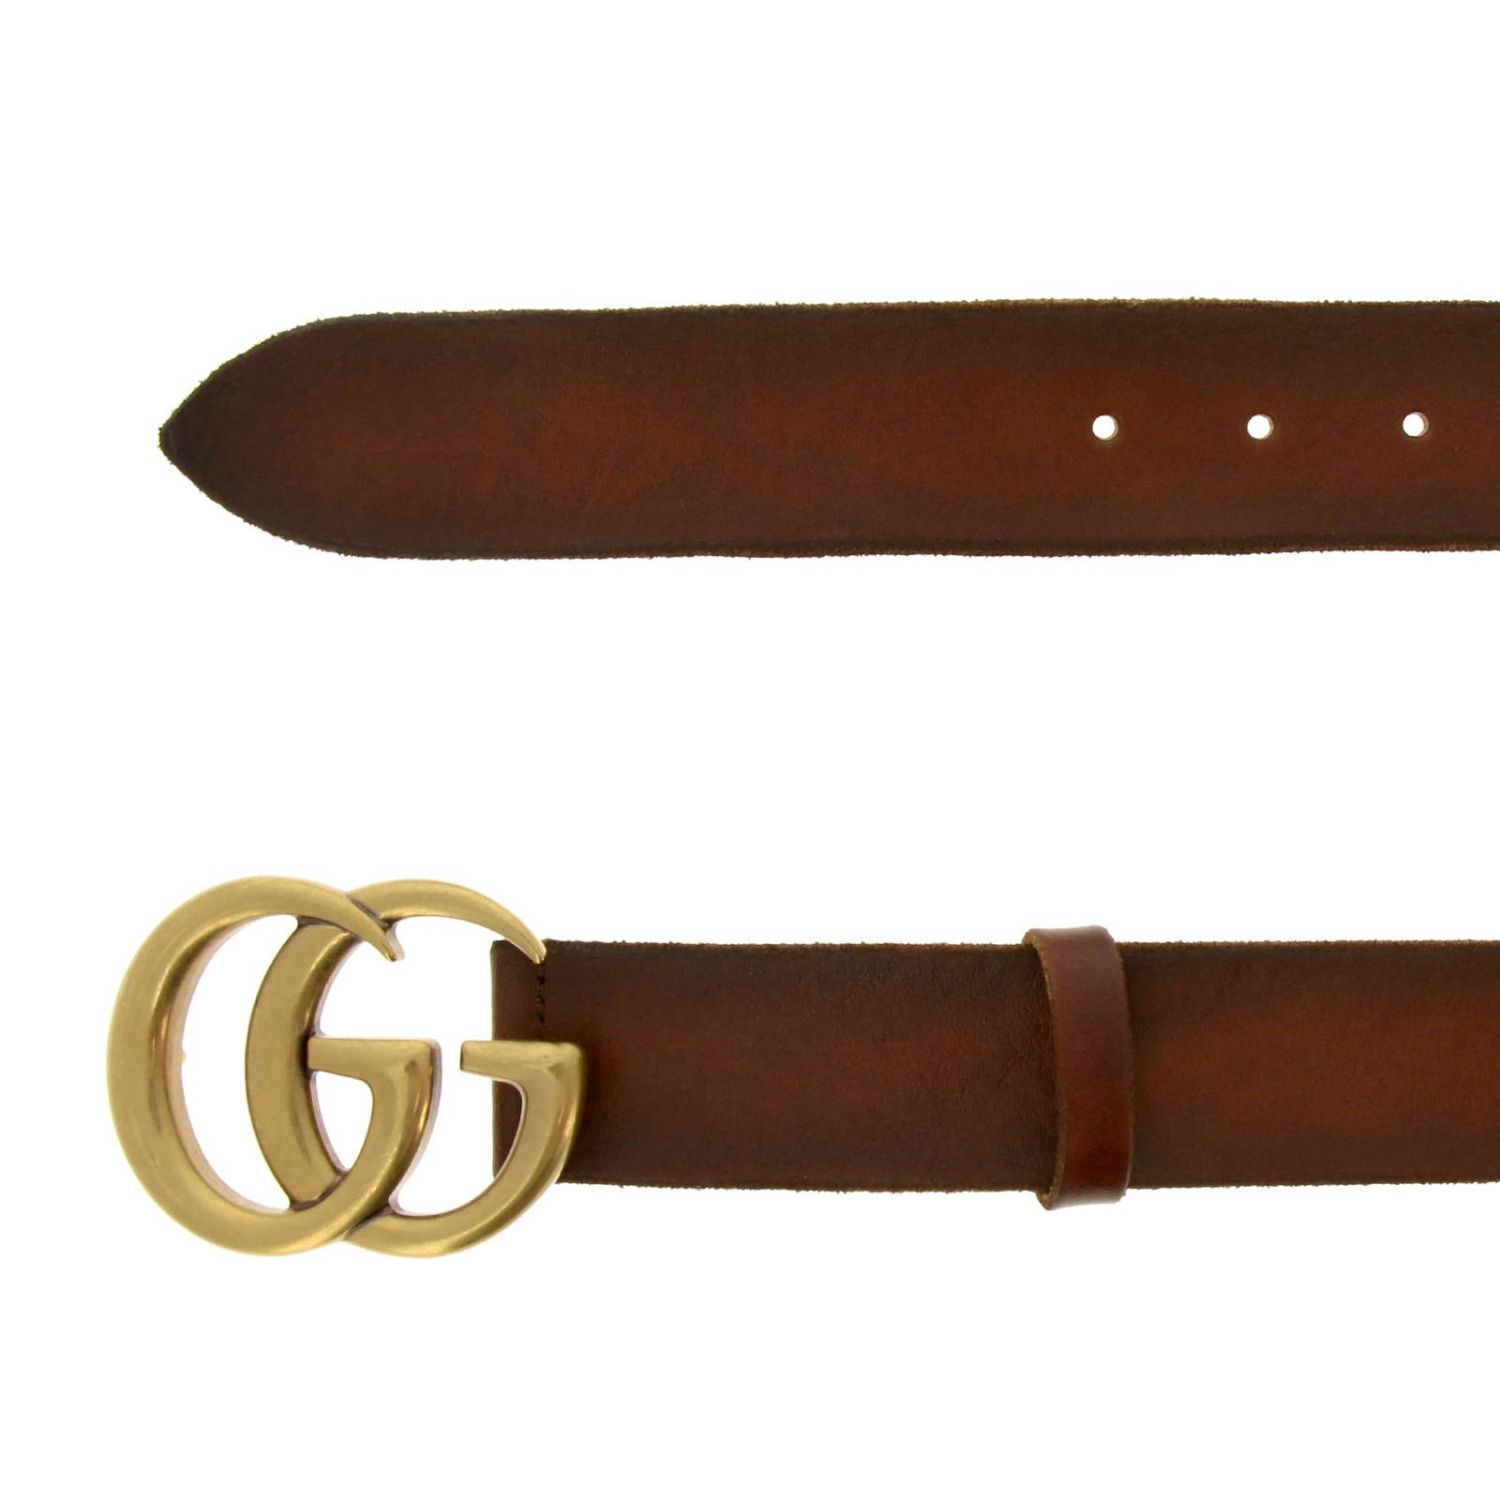 GUCCI: Vintage leather belt with GG Marmont monogram - Leather | Gucci ...